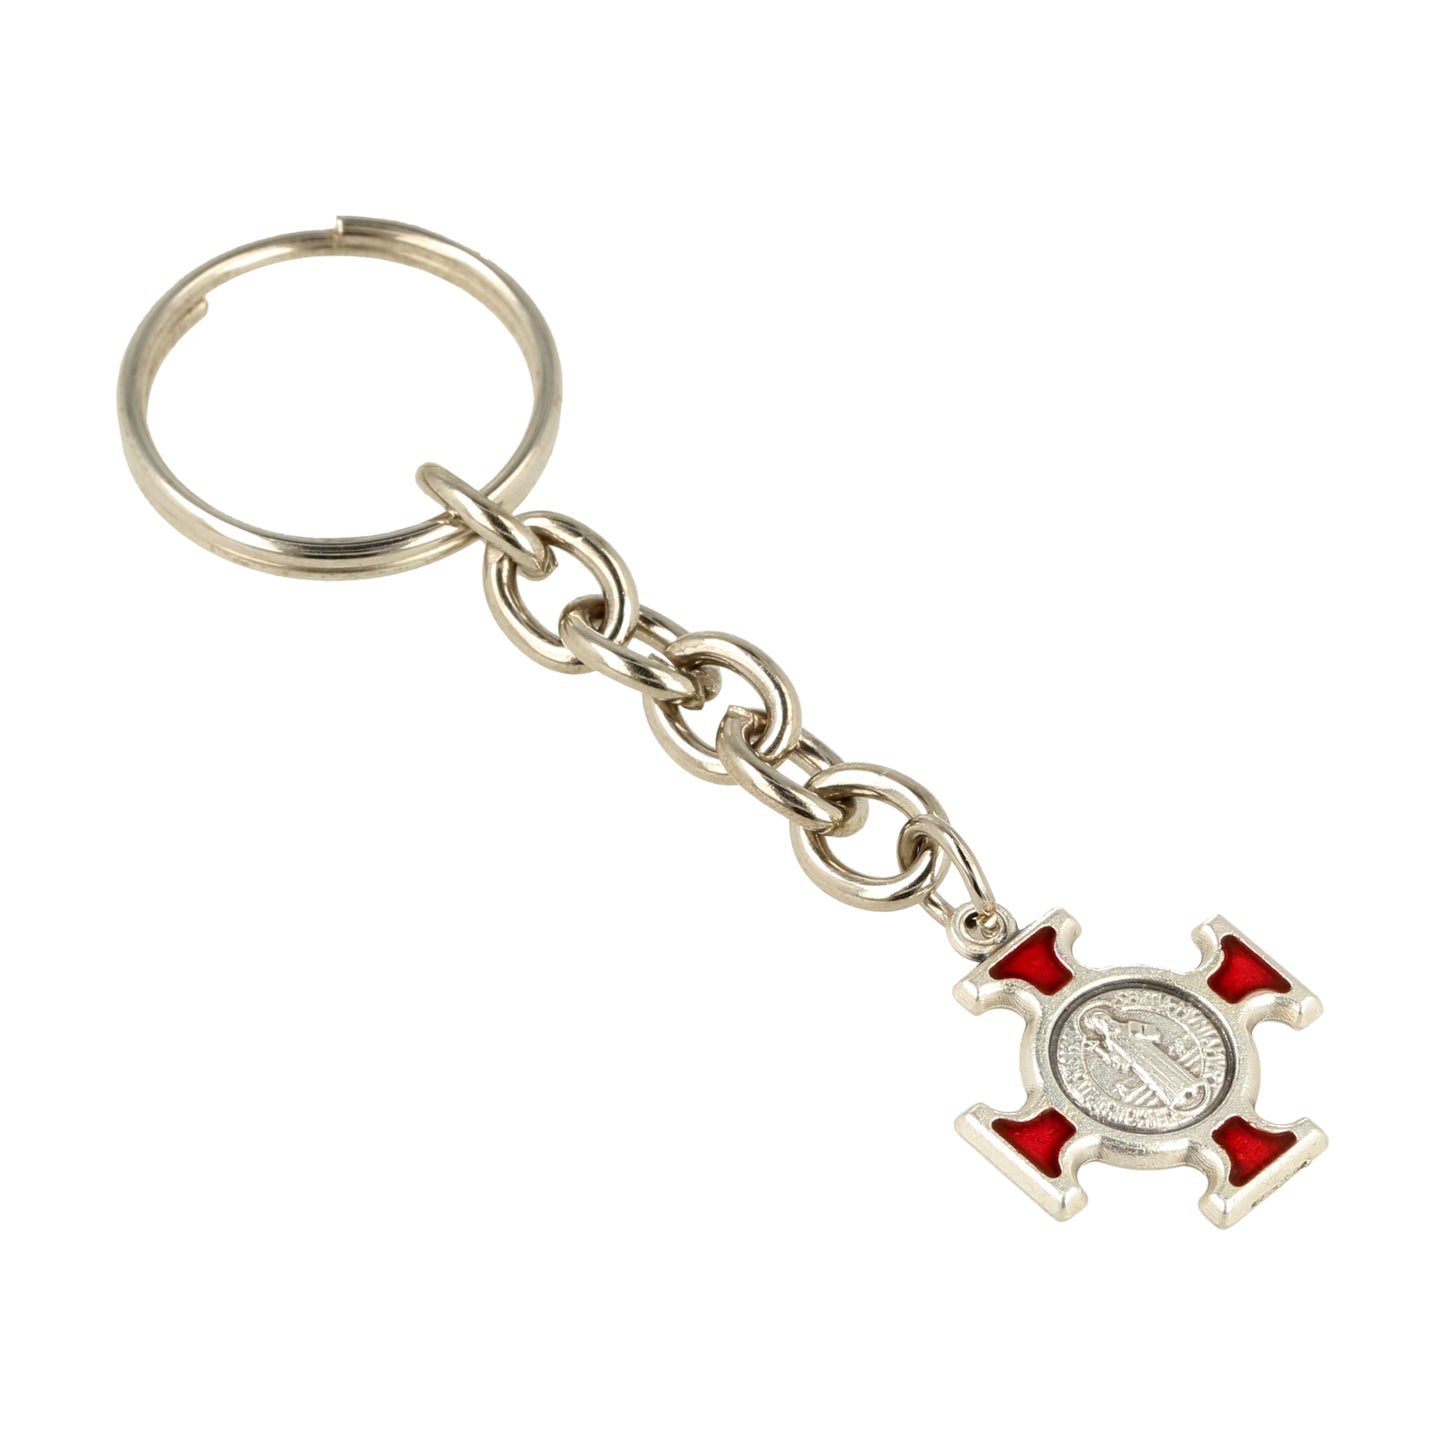 Keychain Red Resin Saint Benedict Cross. Souvenirs from Italy